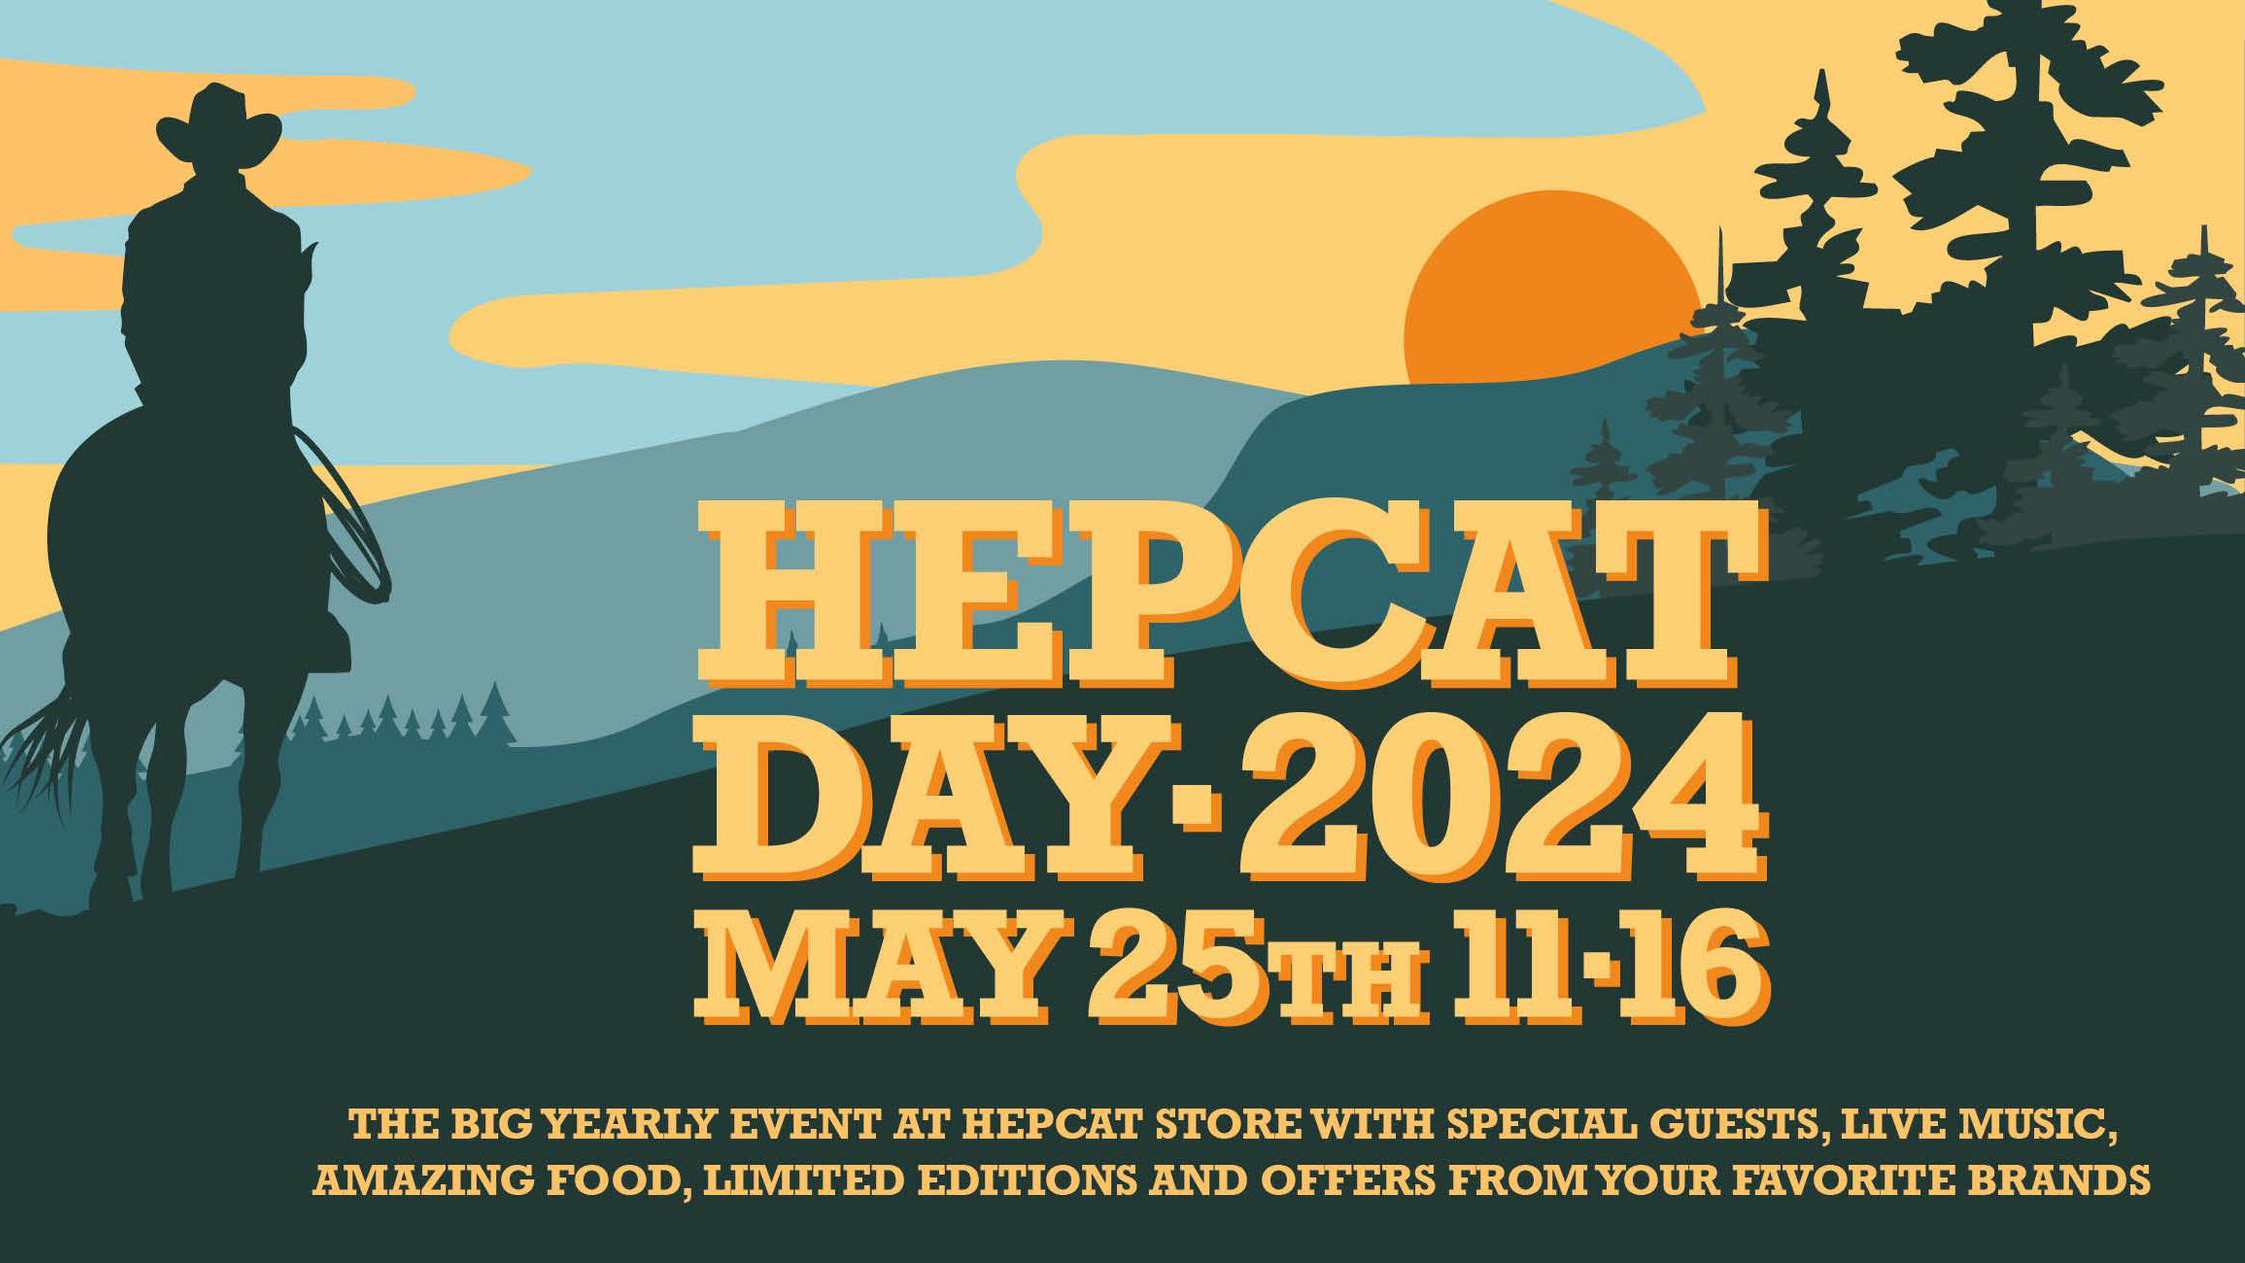 The Big Annual Party at the store! HepCat Day!